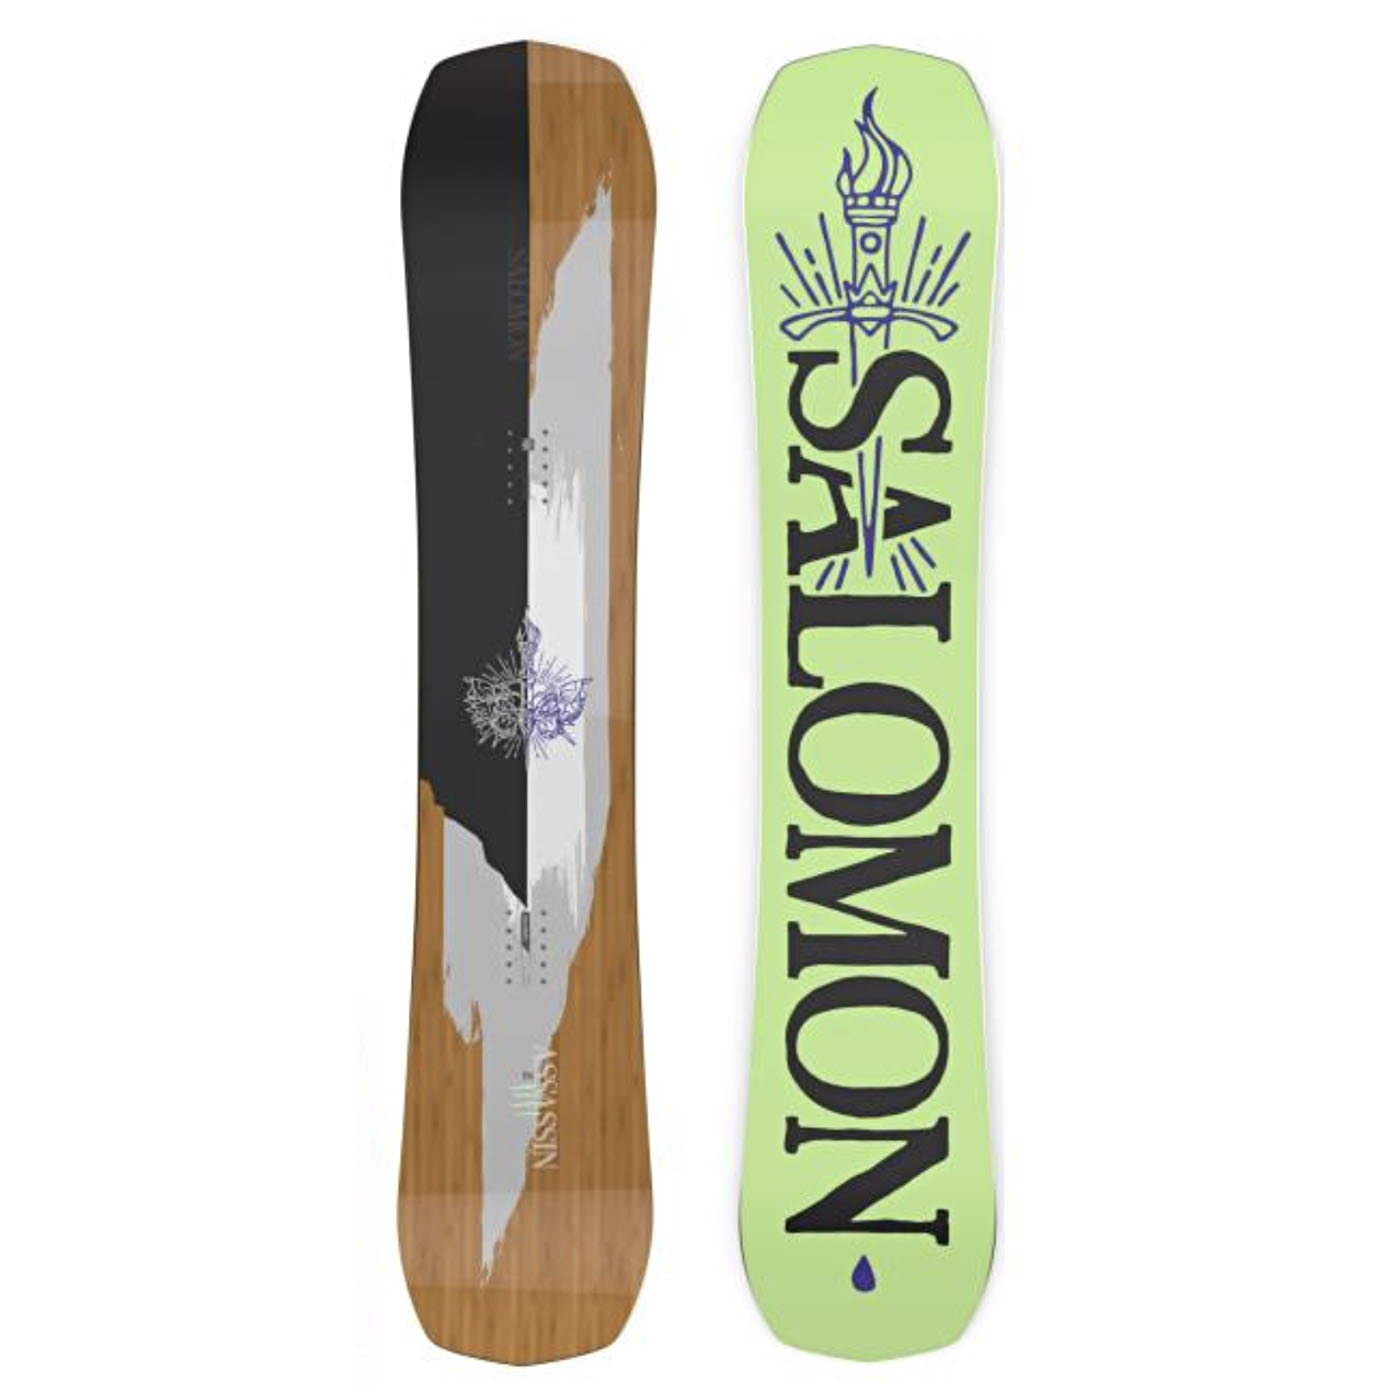 Salomon Assassin Review - Easy all-mountain and park board